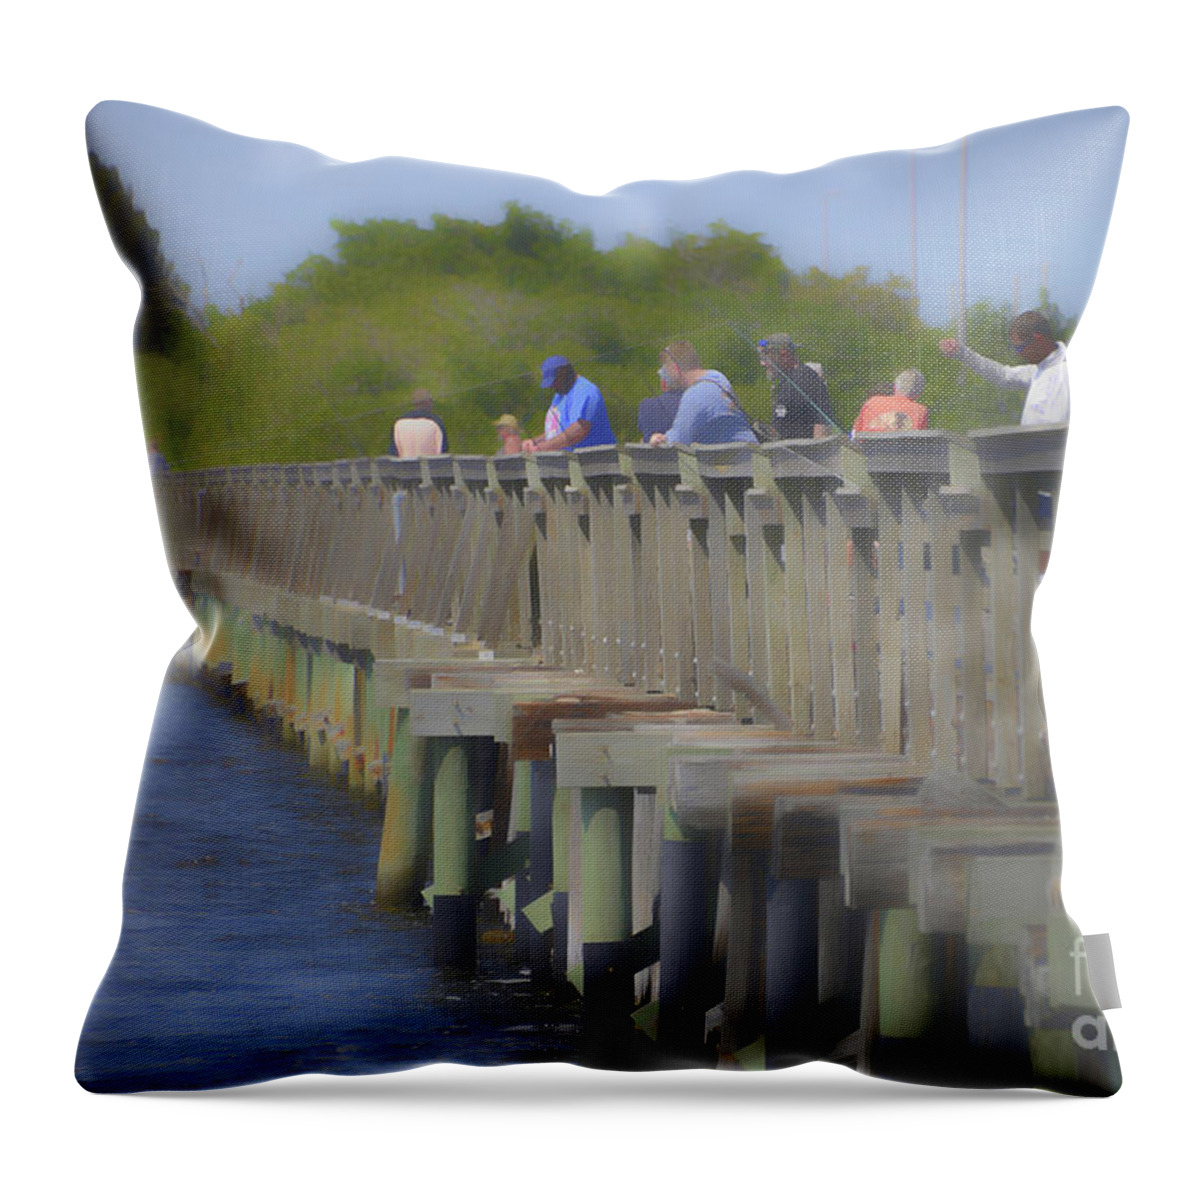 Fishing Pier Throw Pillow featuring the photograph Fishing Pier Gone by Alison Belsan Horton